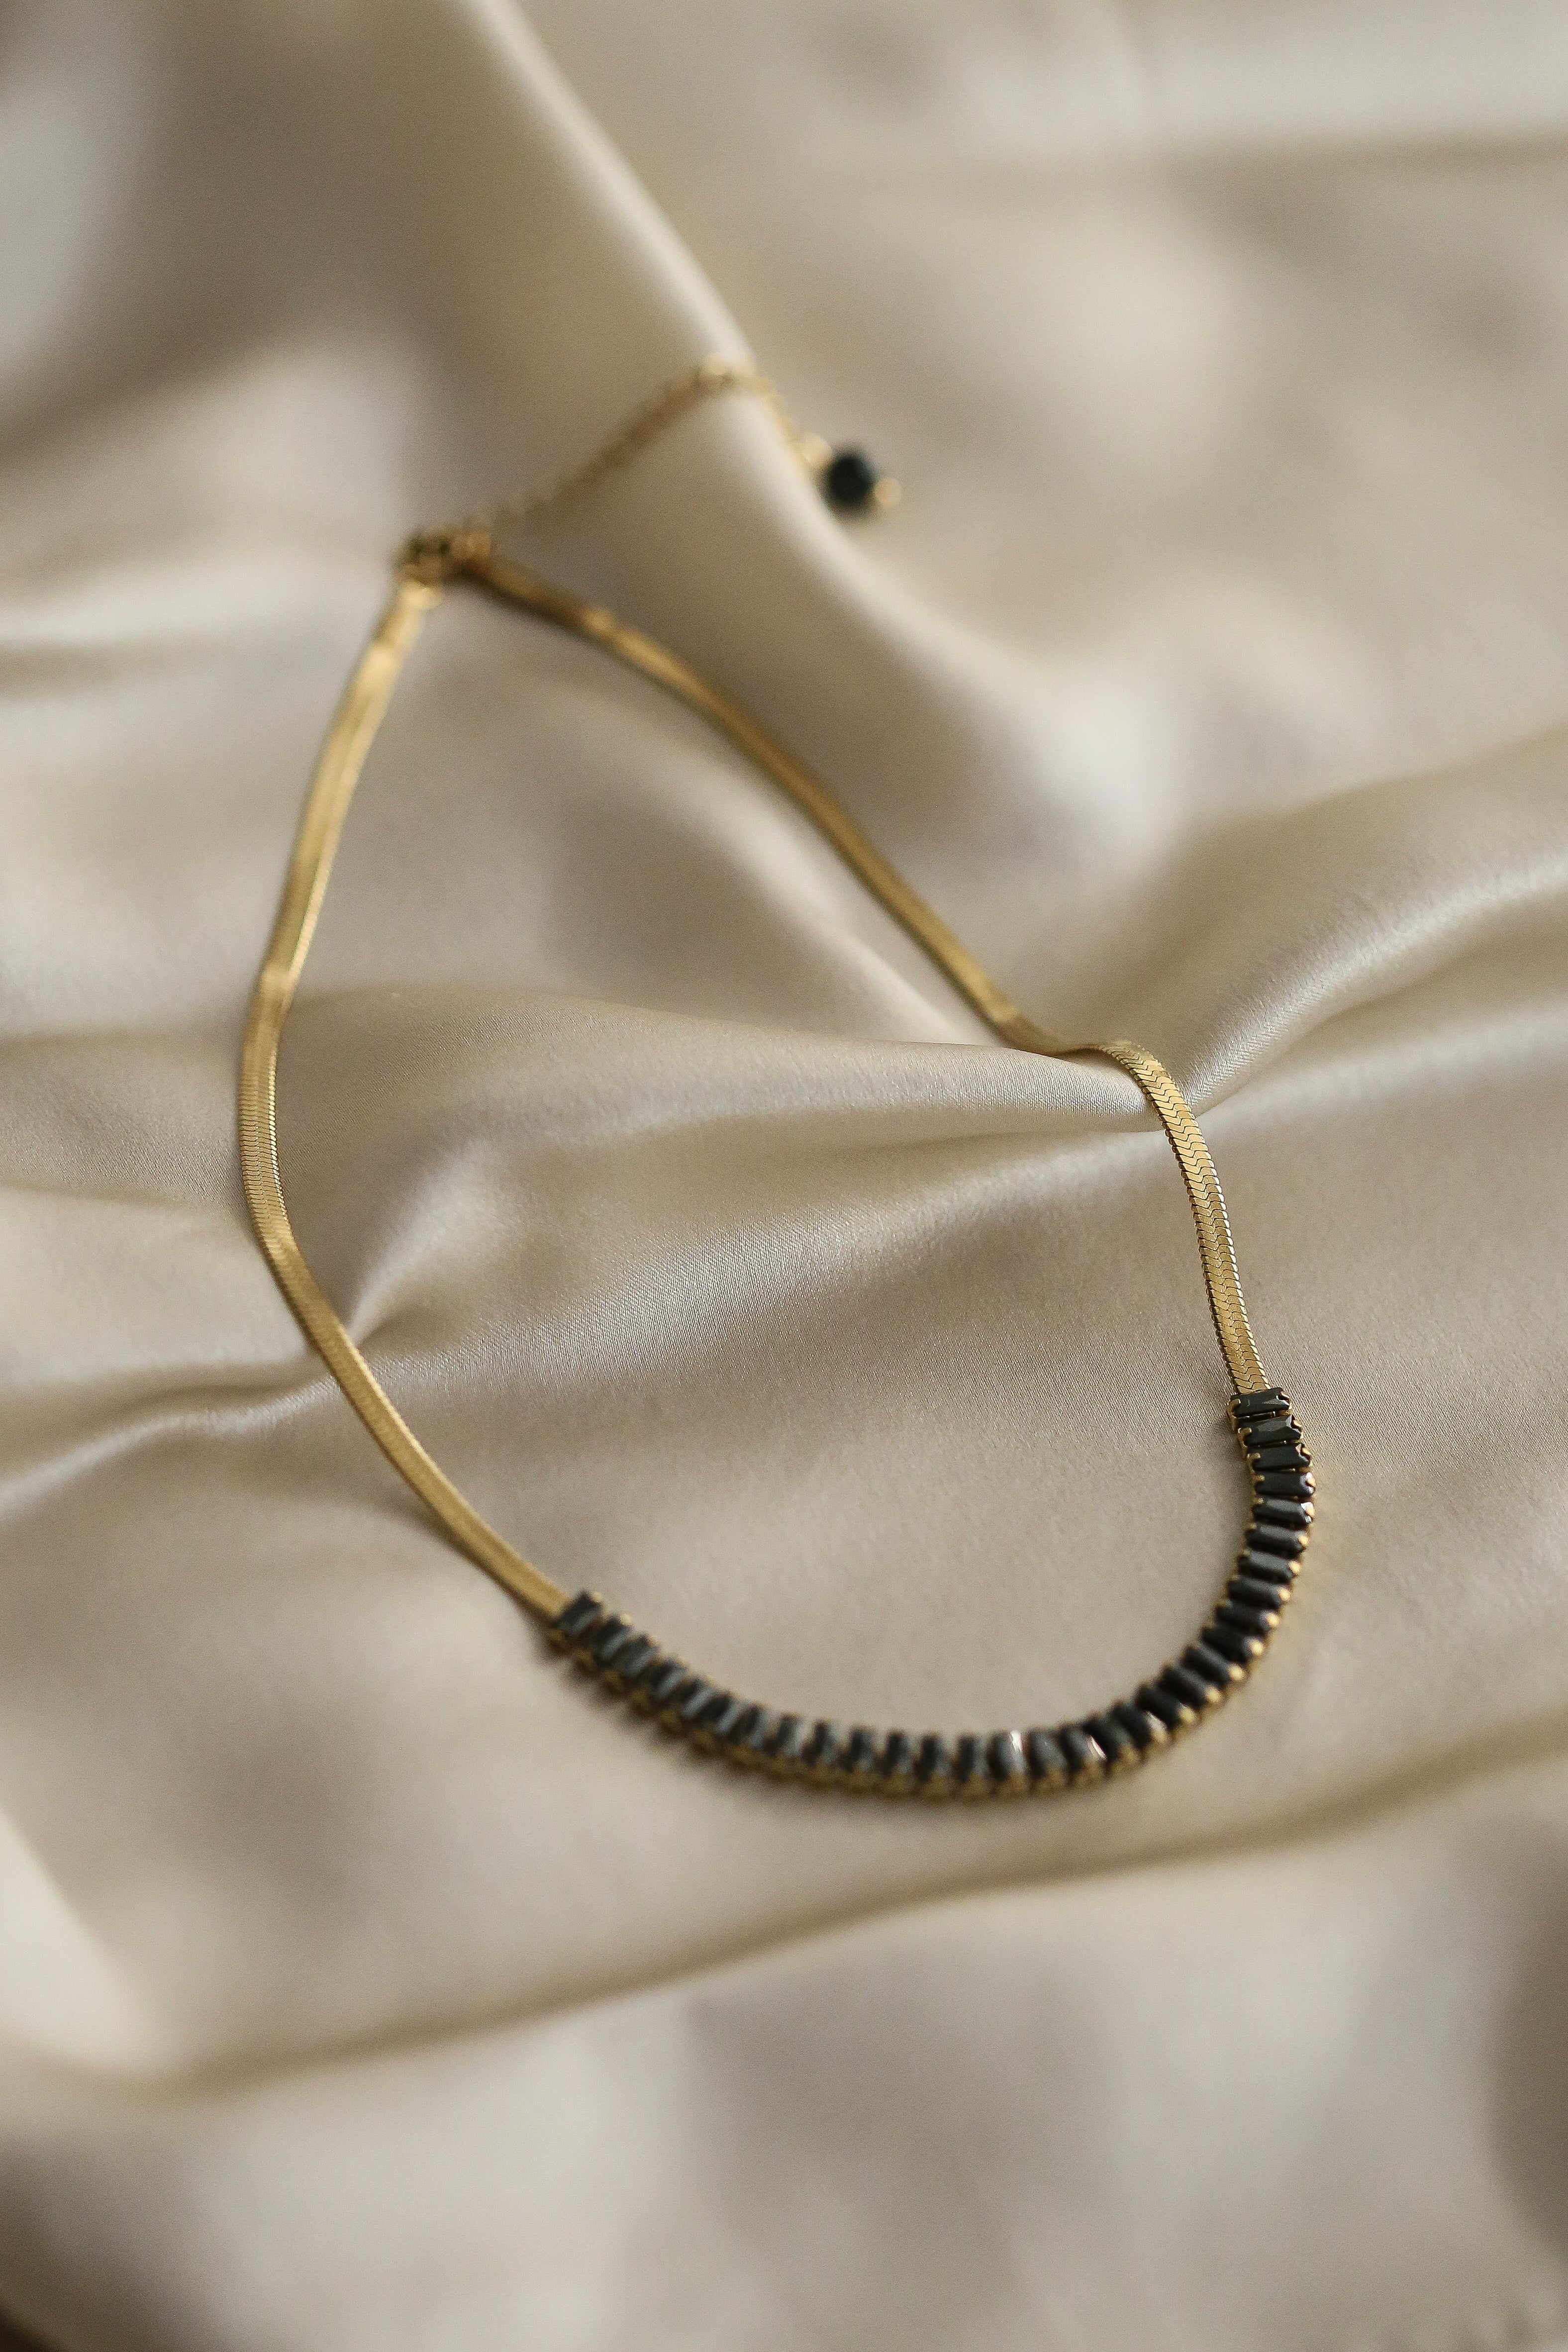 Odessa Necklace - Boutique Minimaliste has waterproof, durable, elegant and vintage inspired jewelry